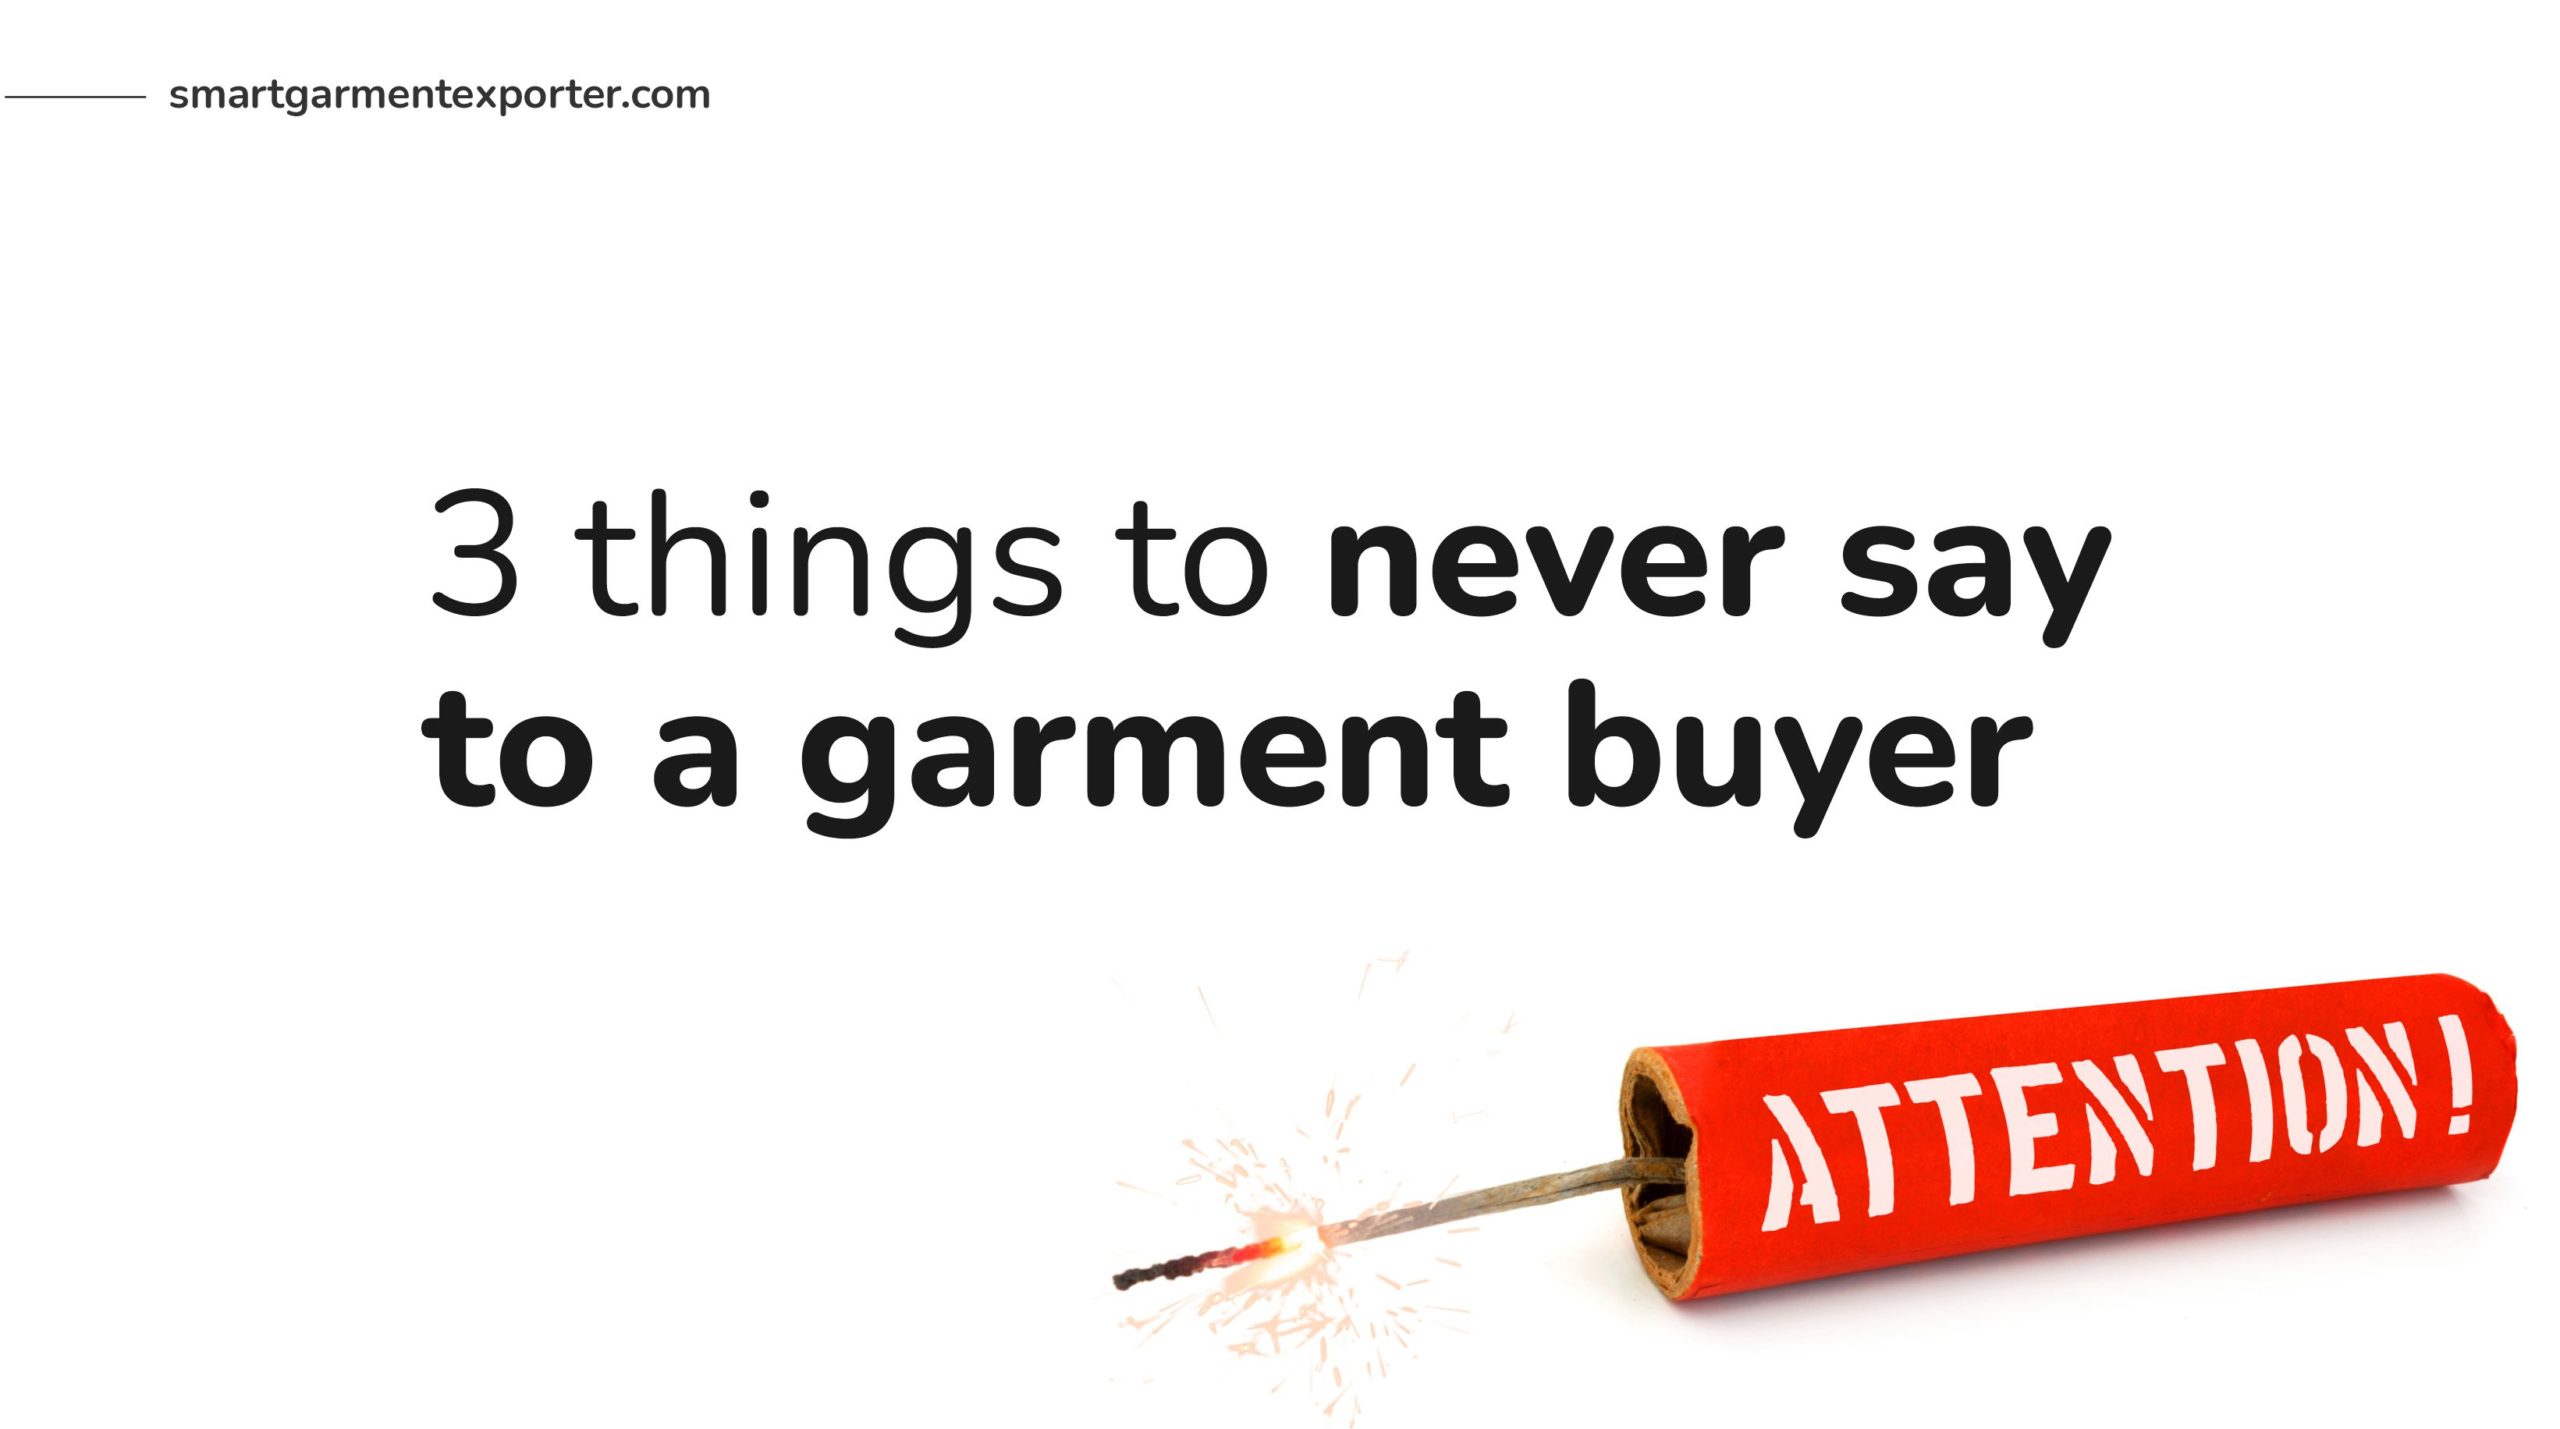 3 things to never say to a garment buyer